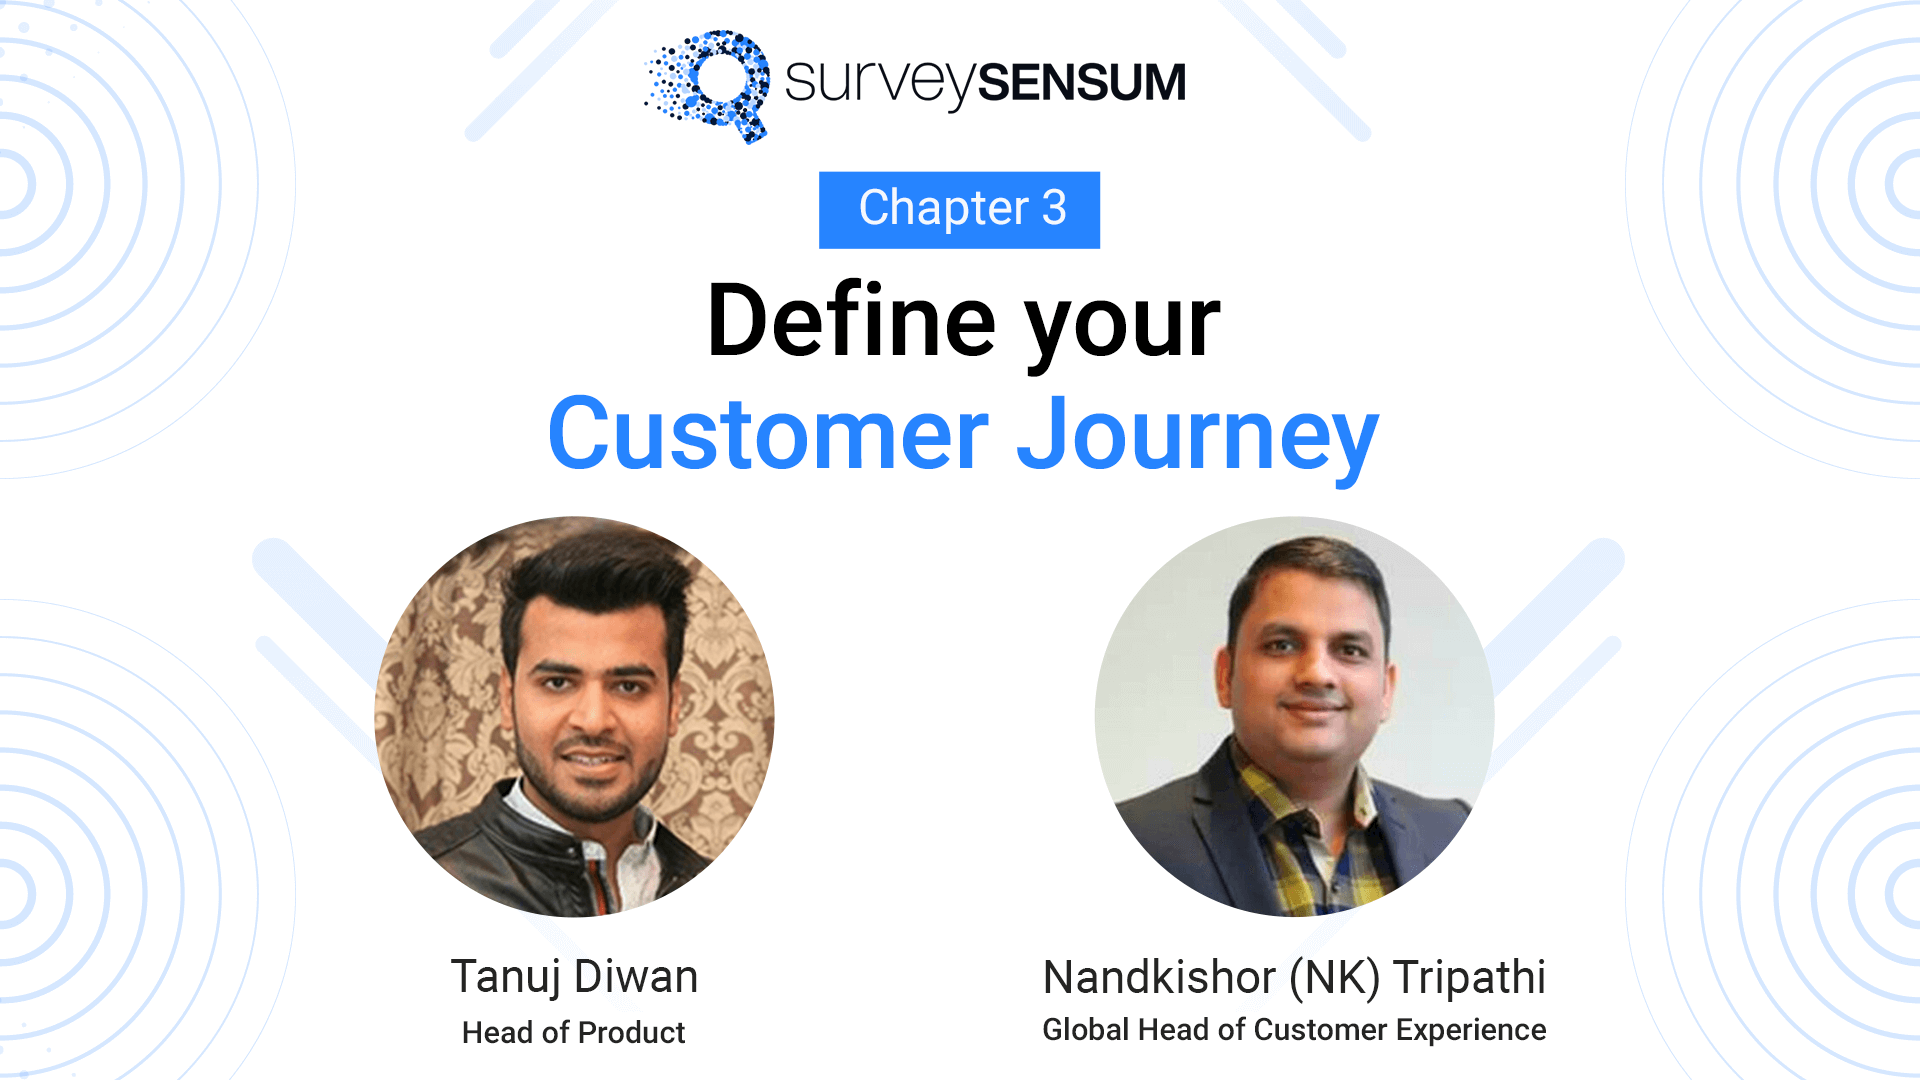 Chapter 3: Define your Customer Journey